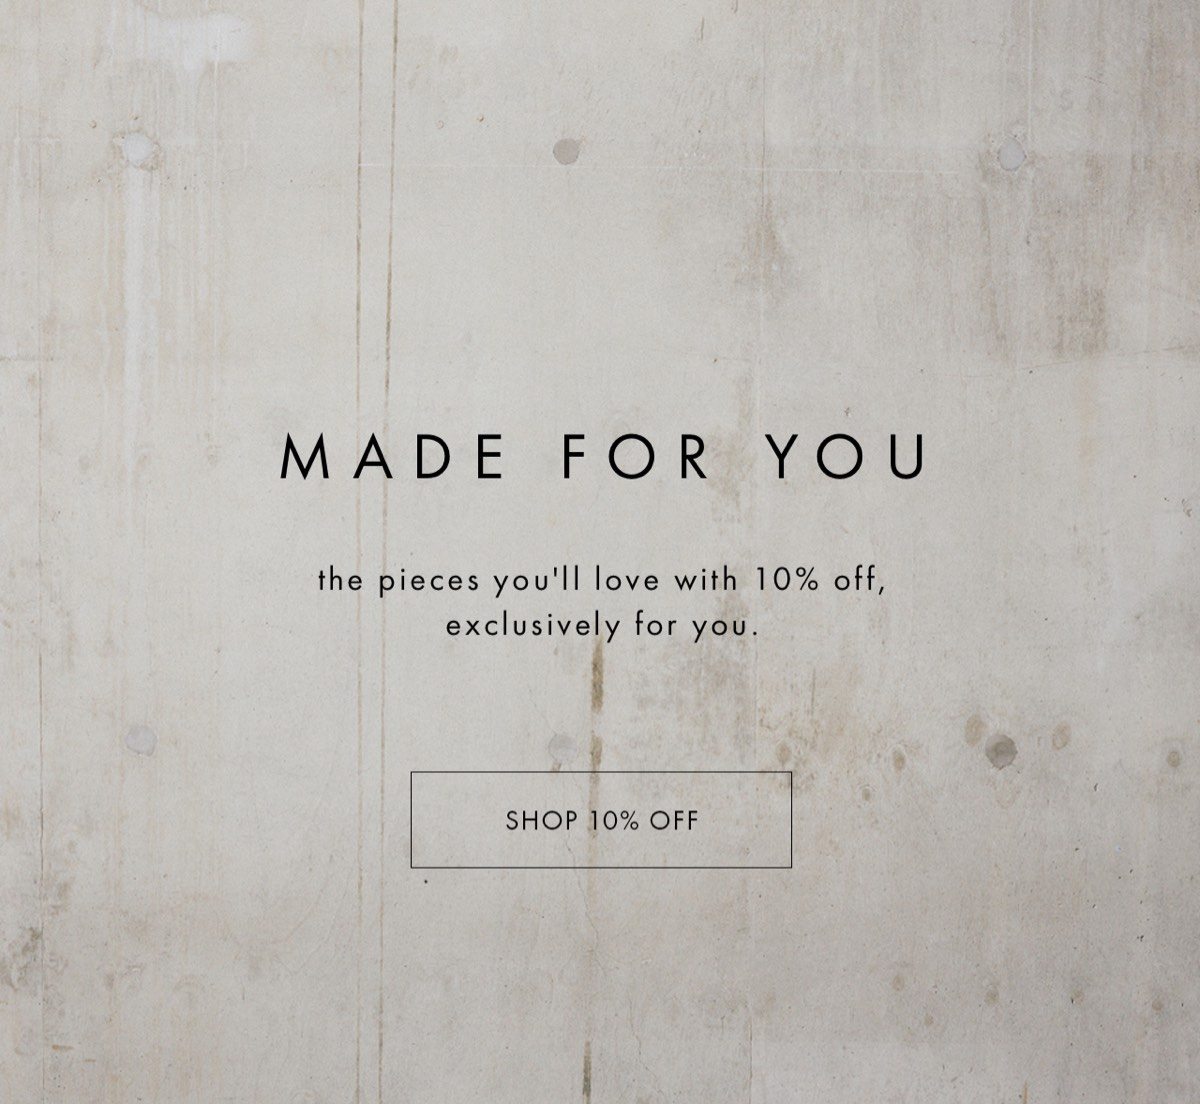 made for you the pieces you'll love with 10% off, exclusively for you shop 10% off